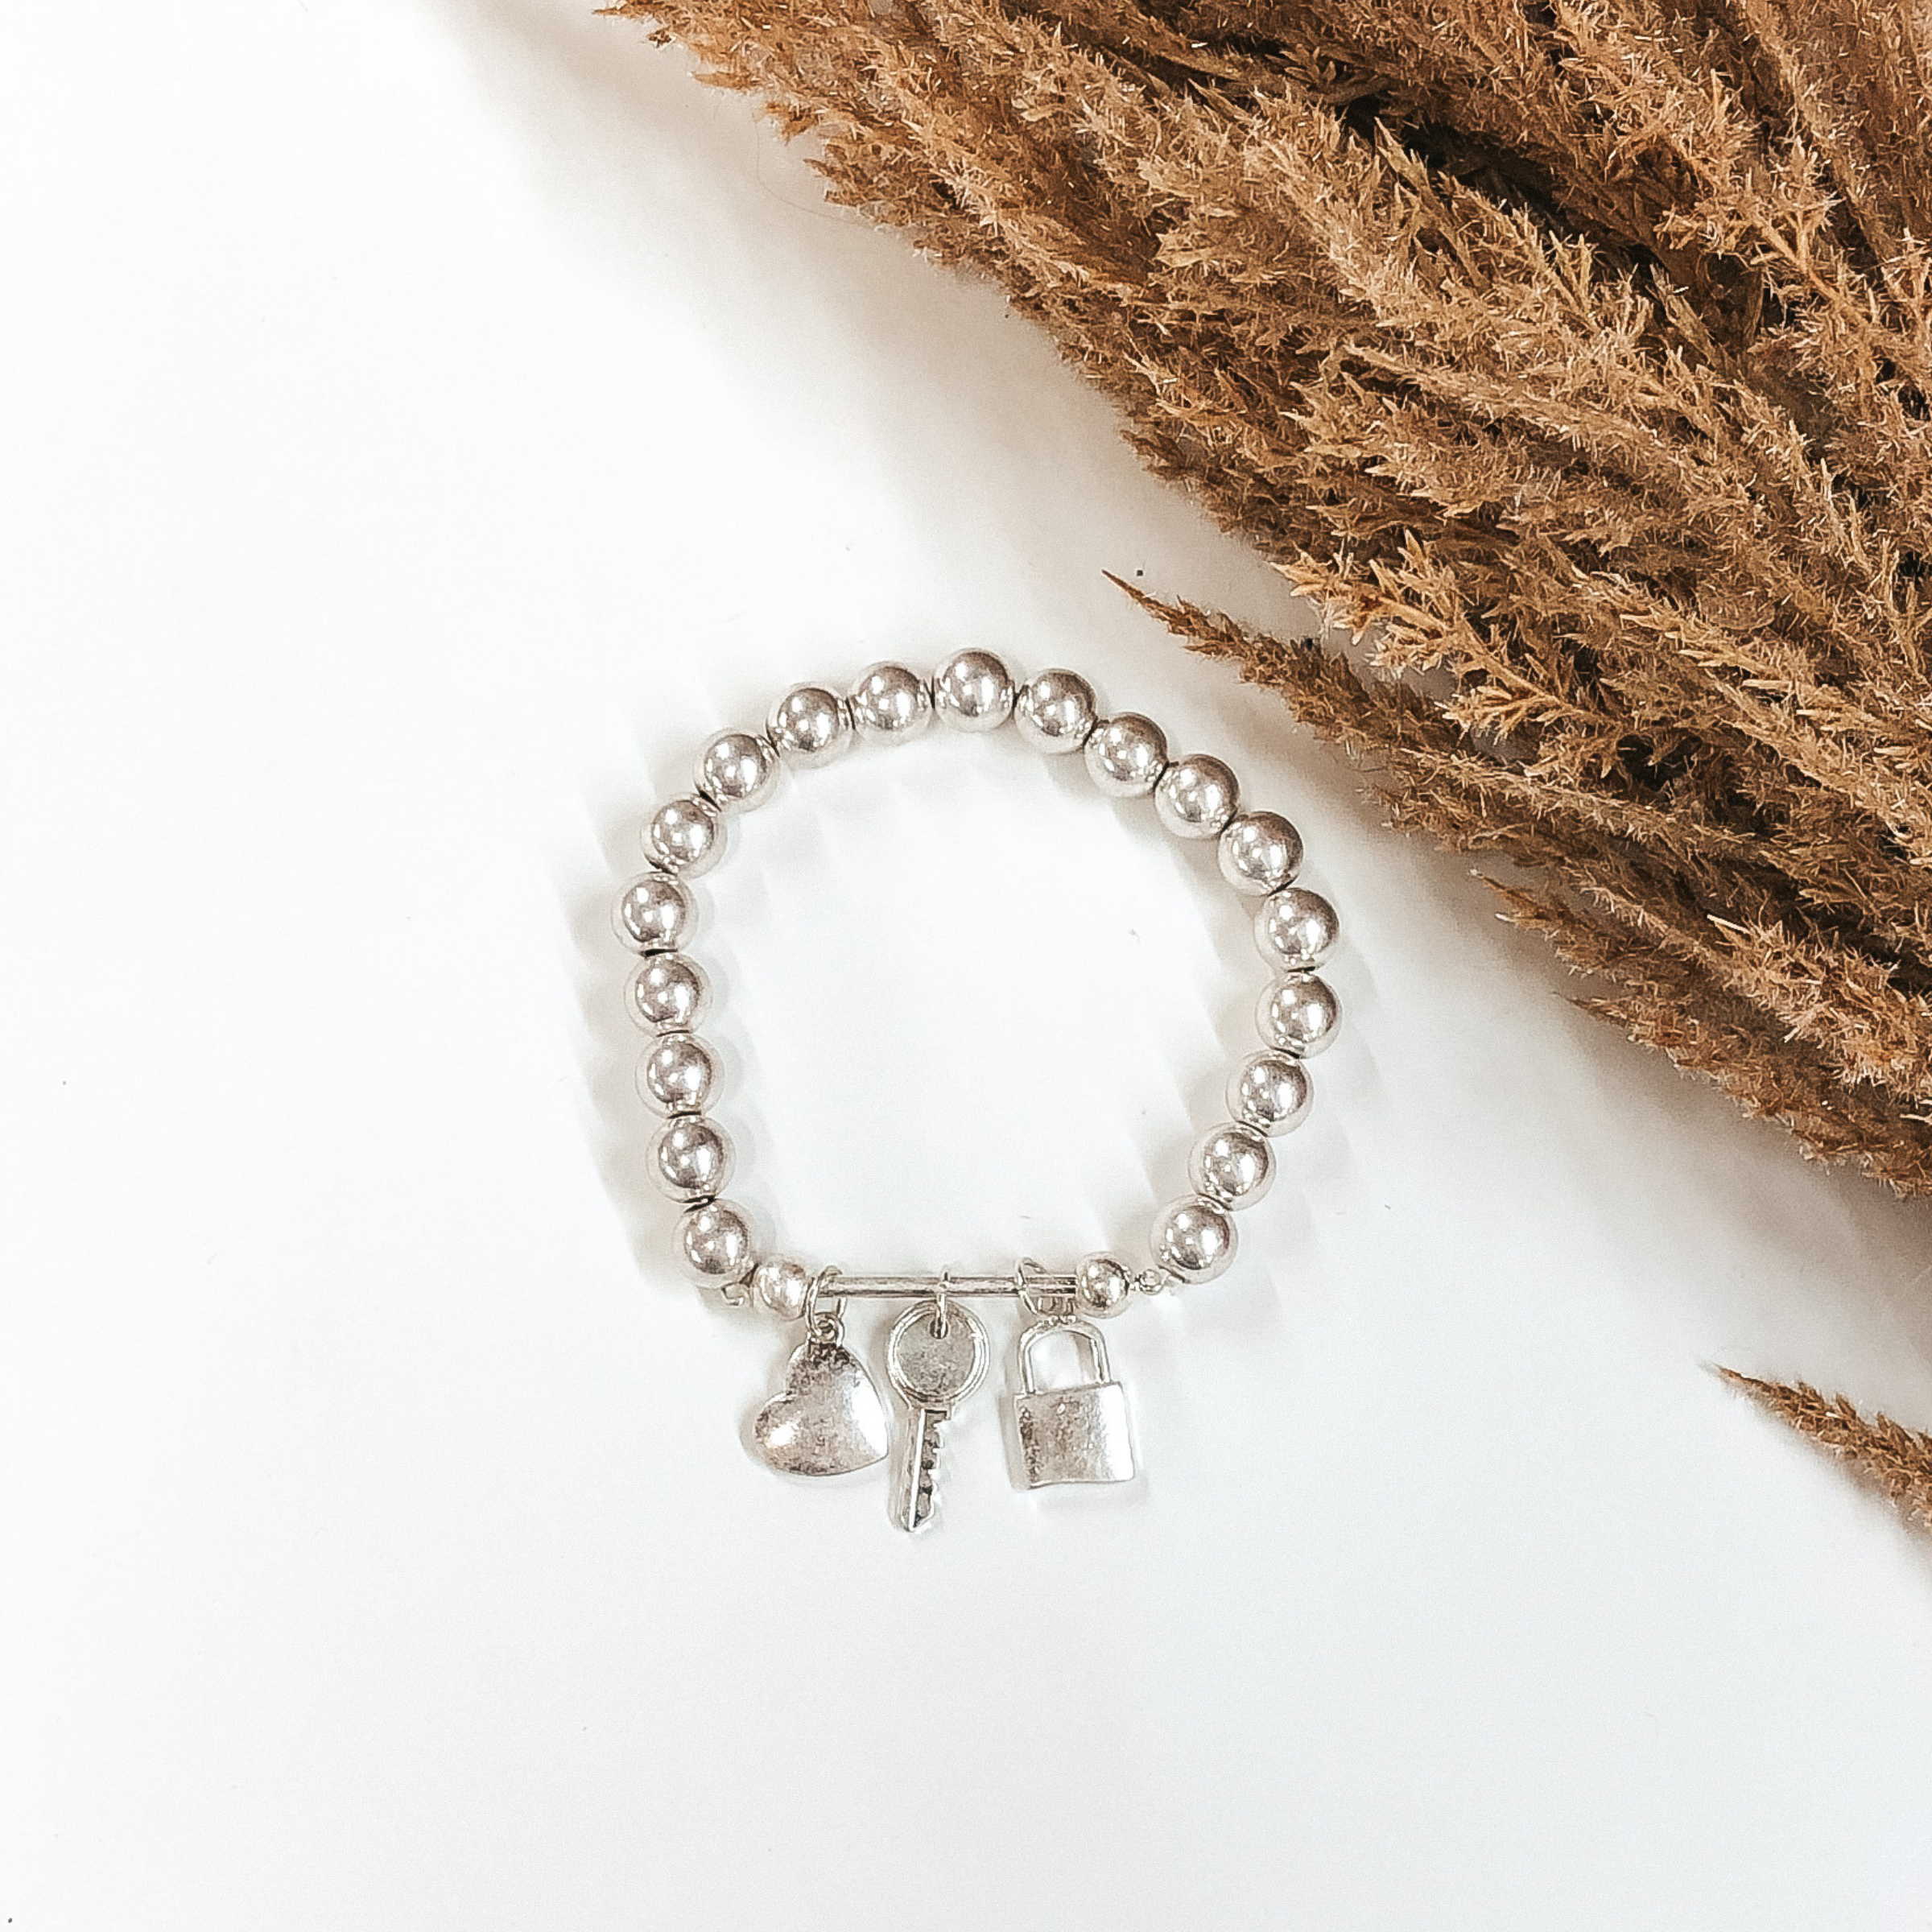 Lock Up Your Heart Bracelet in Silver - Giddy Up Glamour Boutique